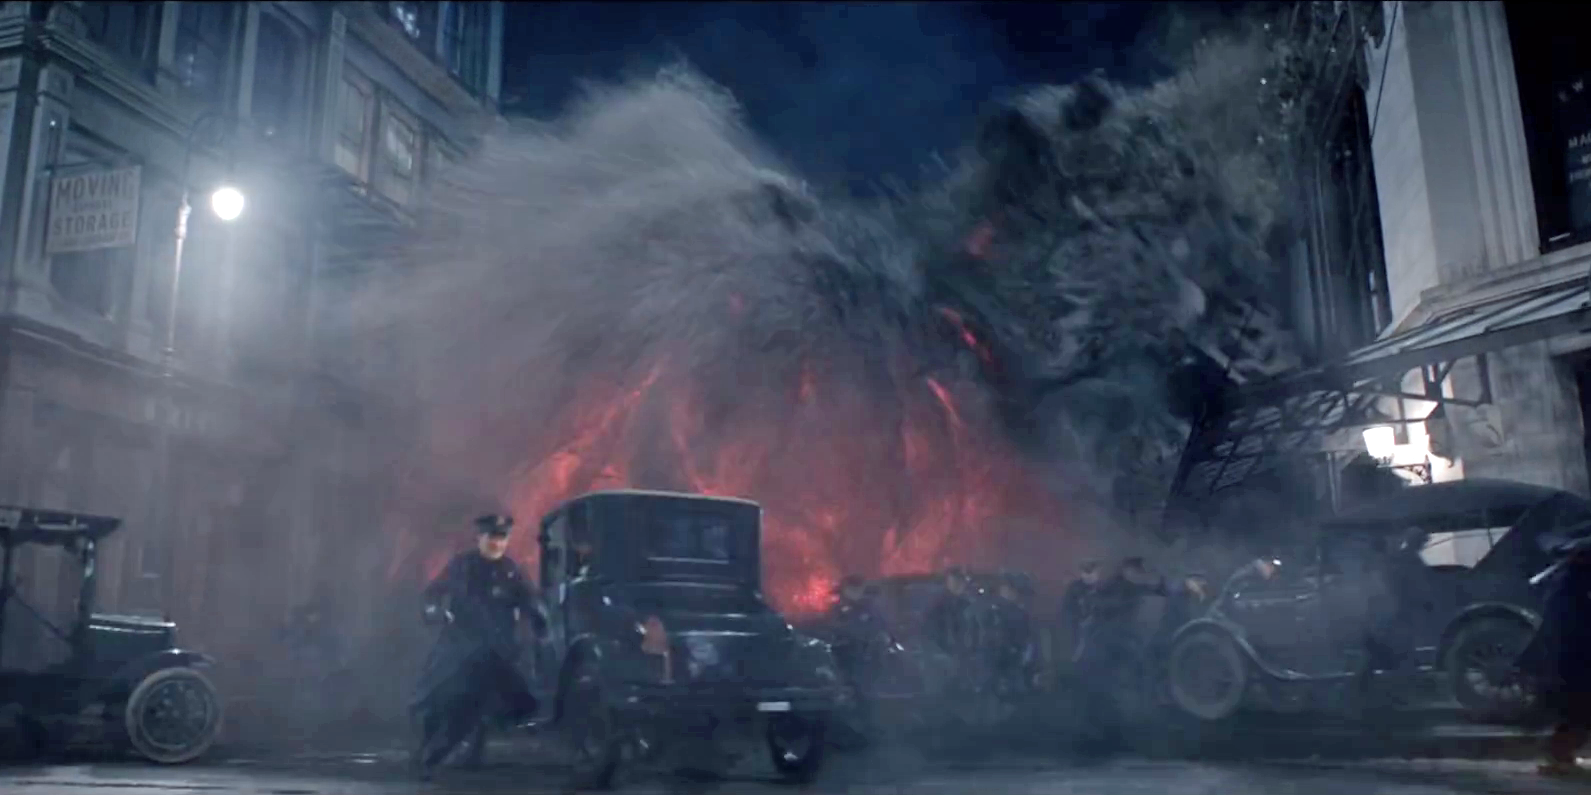 The Obscurus in New York in Fantastic Beasts